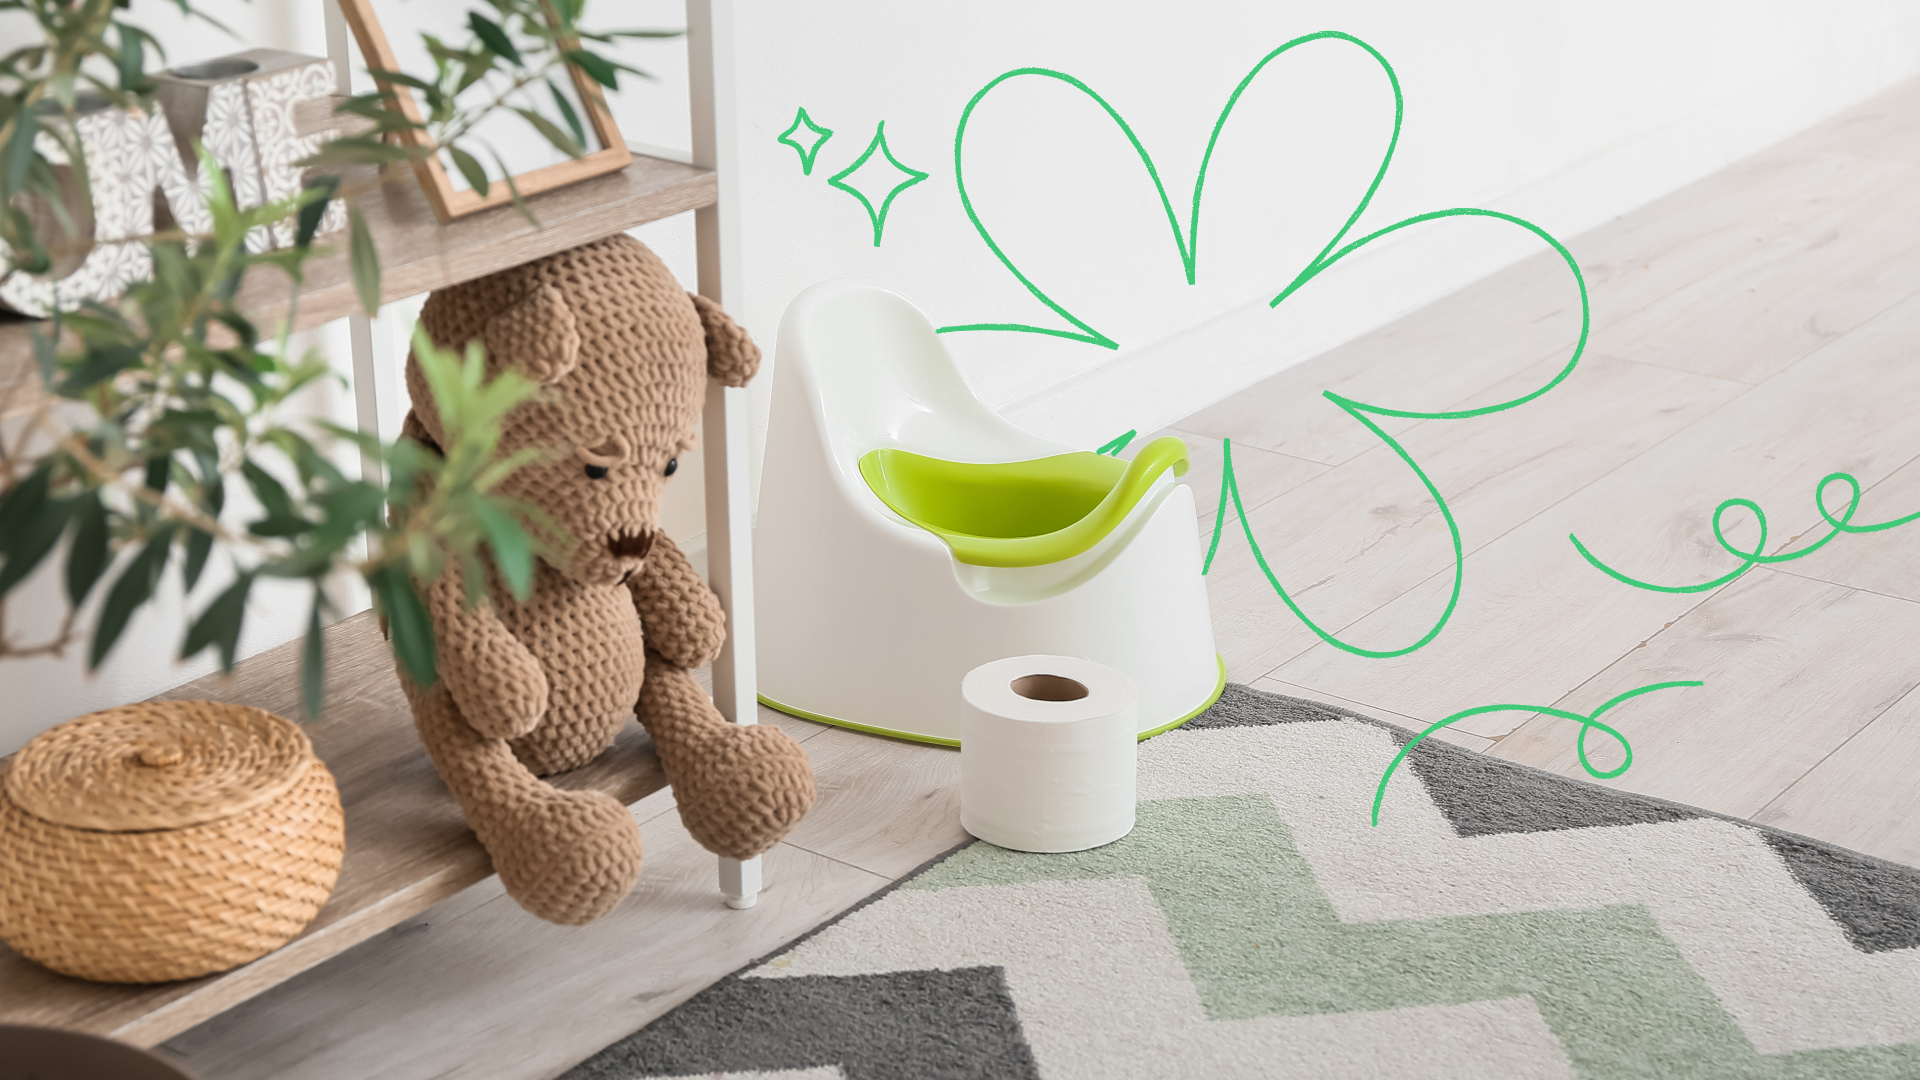 Potty training methods: Which is best for your child?